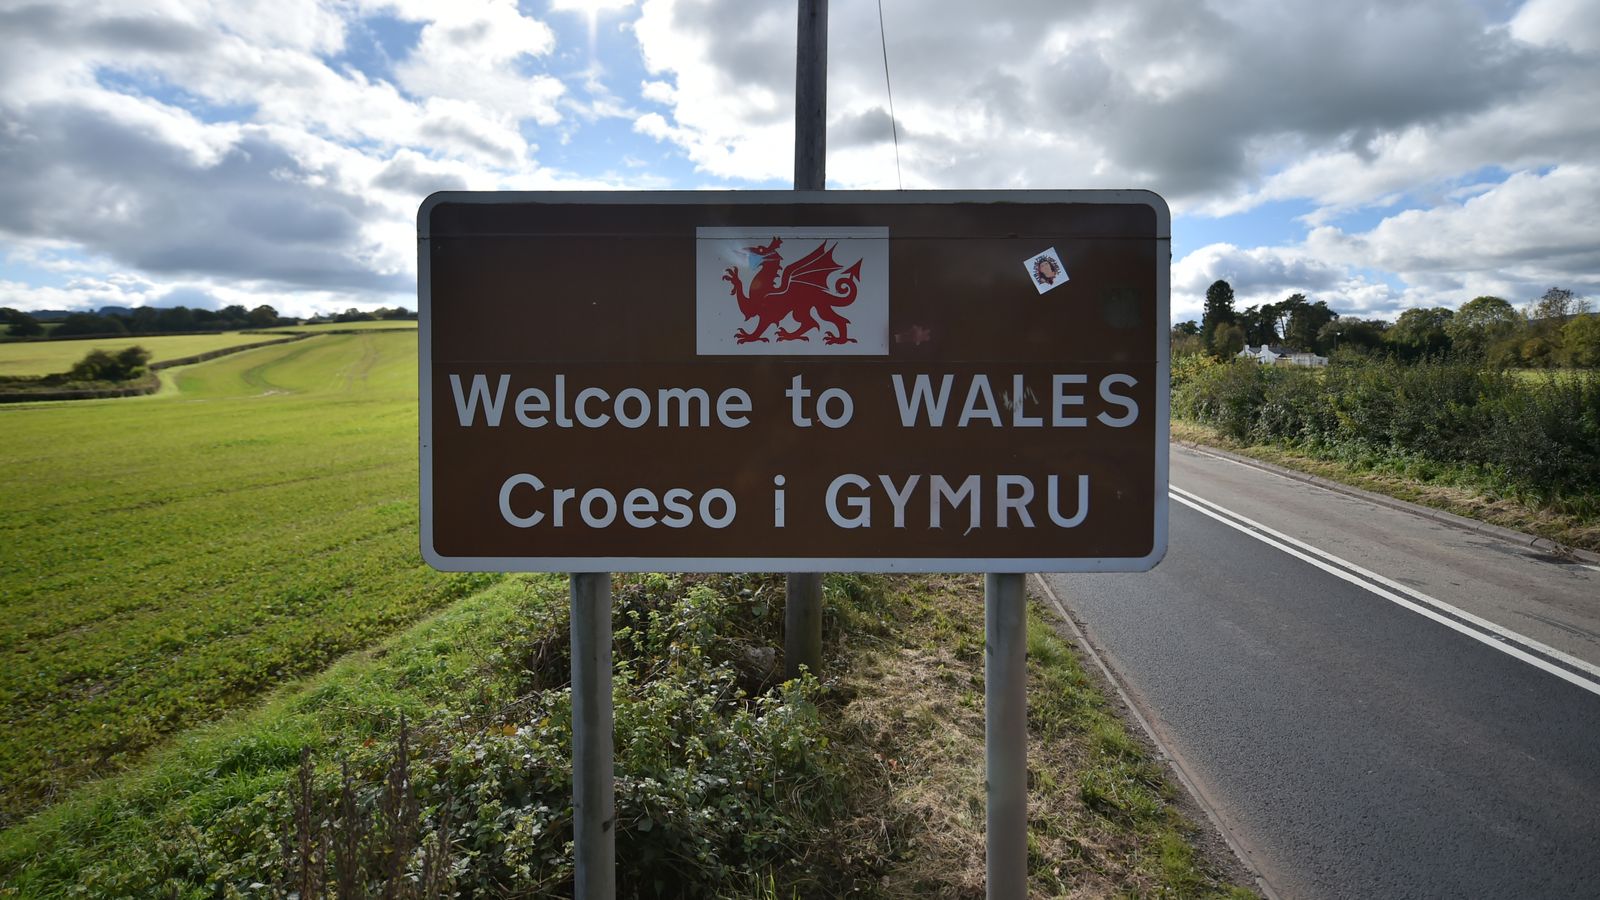 Welsh independence 'viable' but 'most uncertain option' for Wales's future, report finds